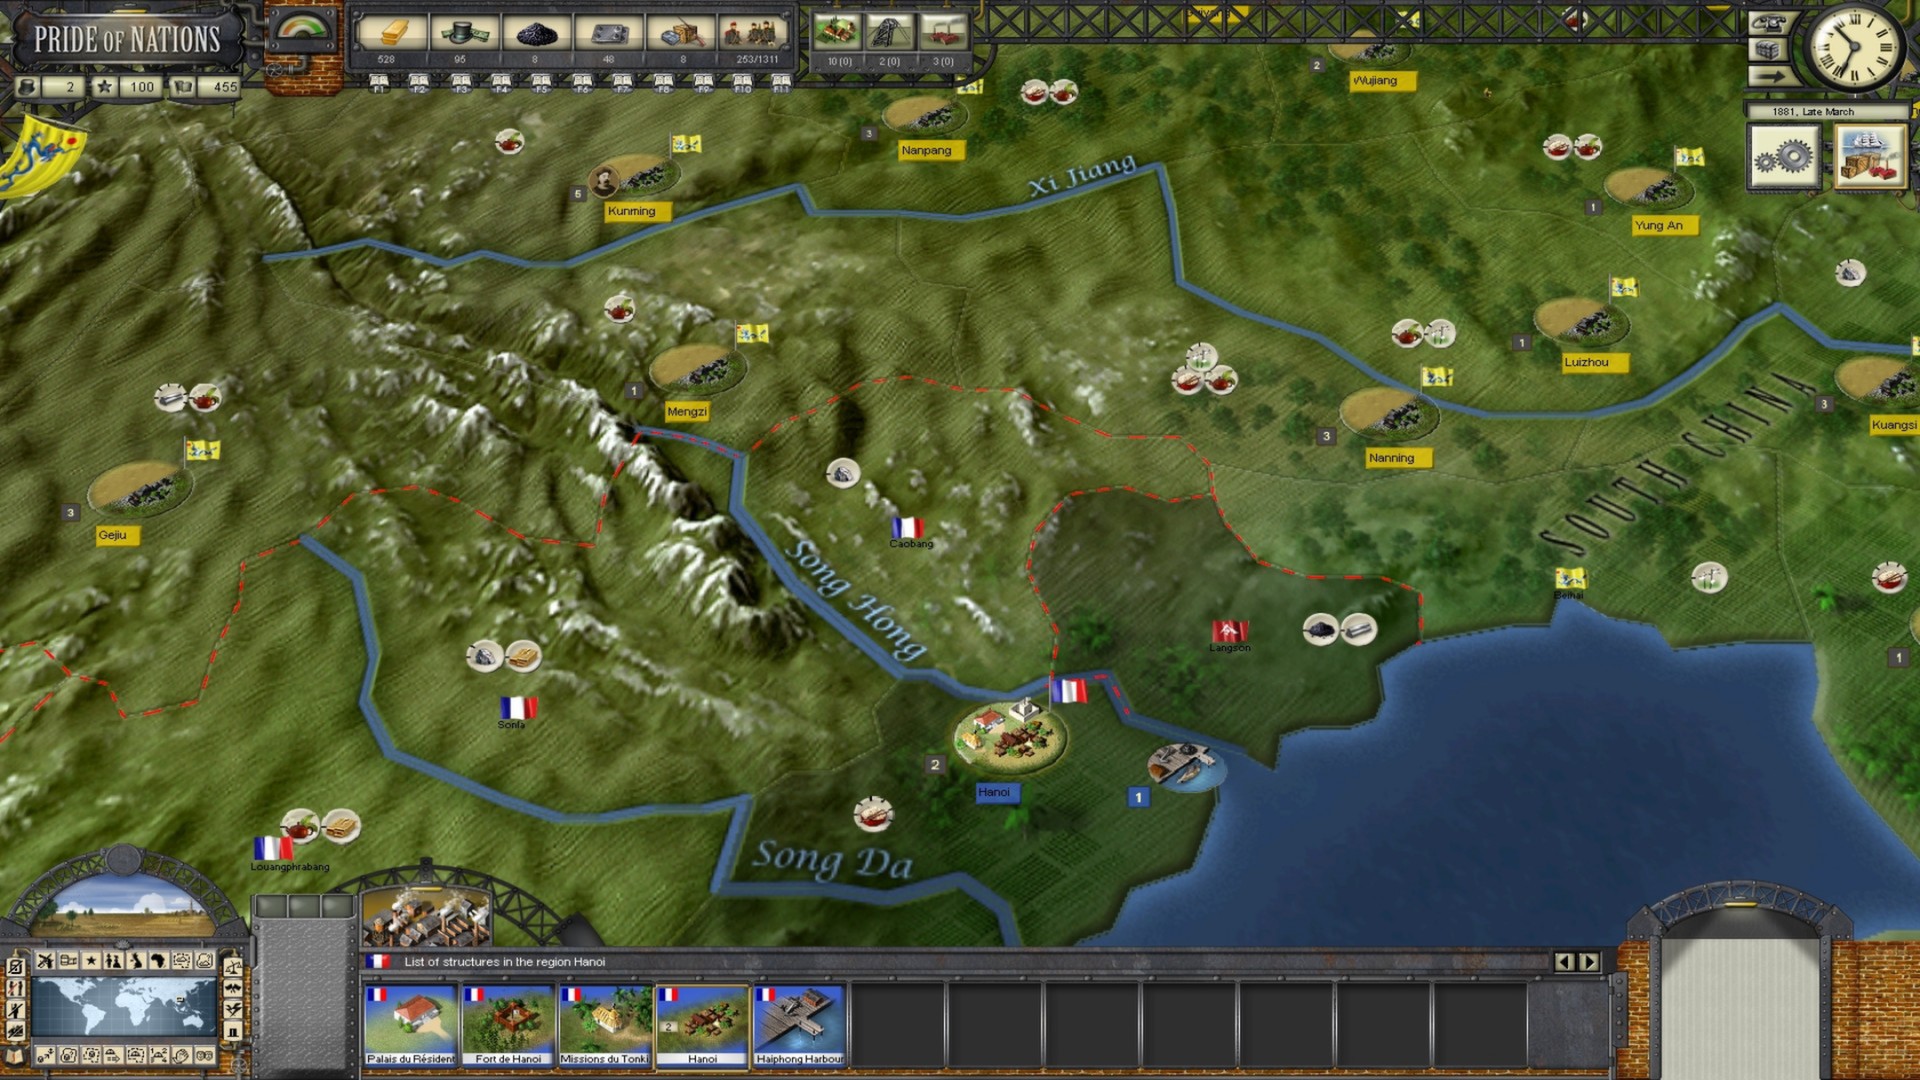 Pride of Nations - The Scramble for Africa DLC Steam CD Key 4.38 usd